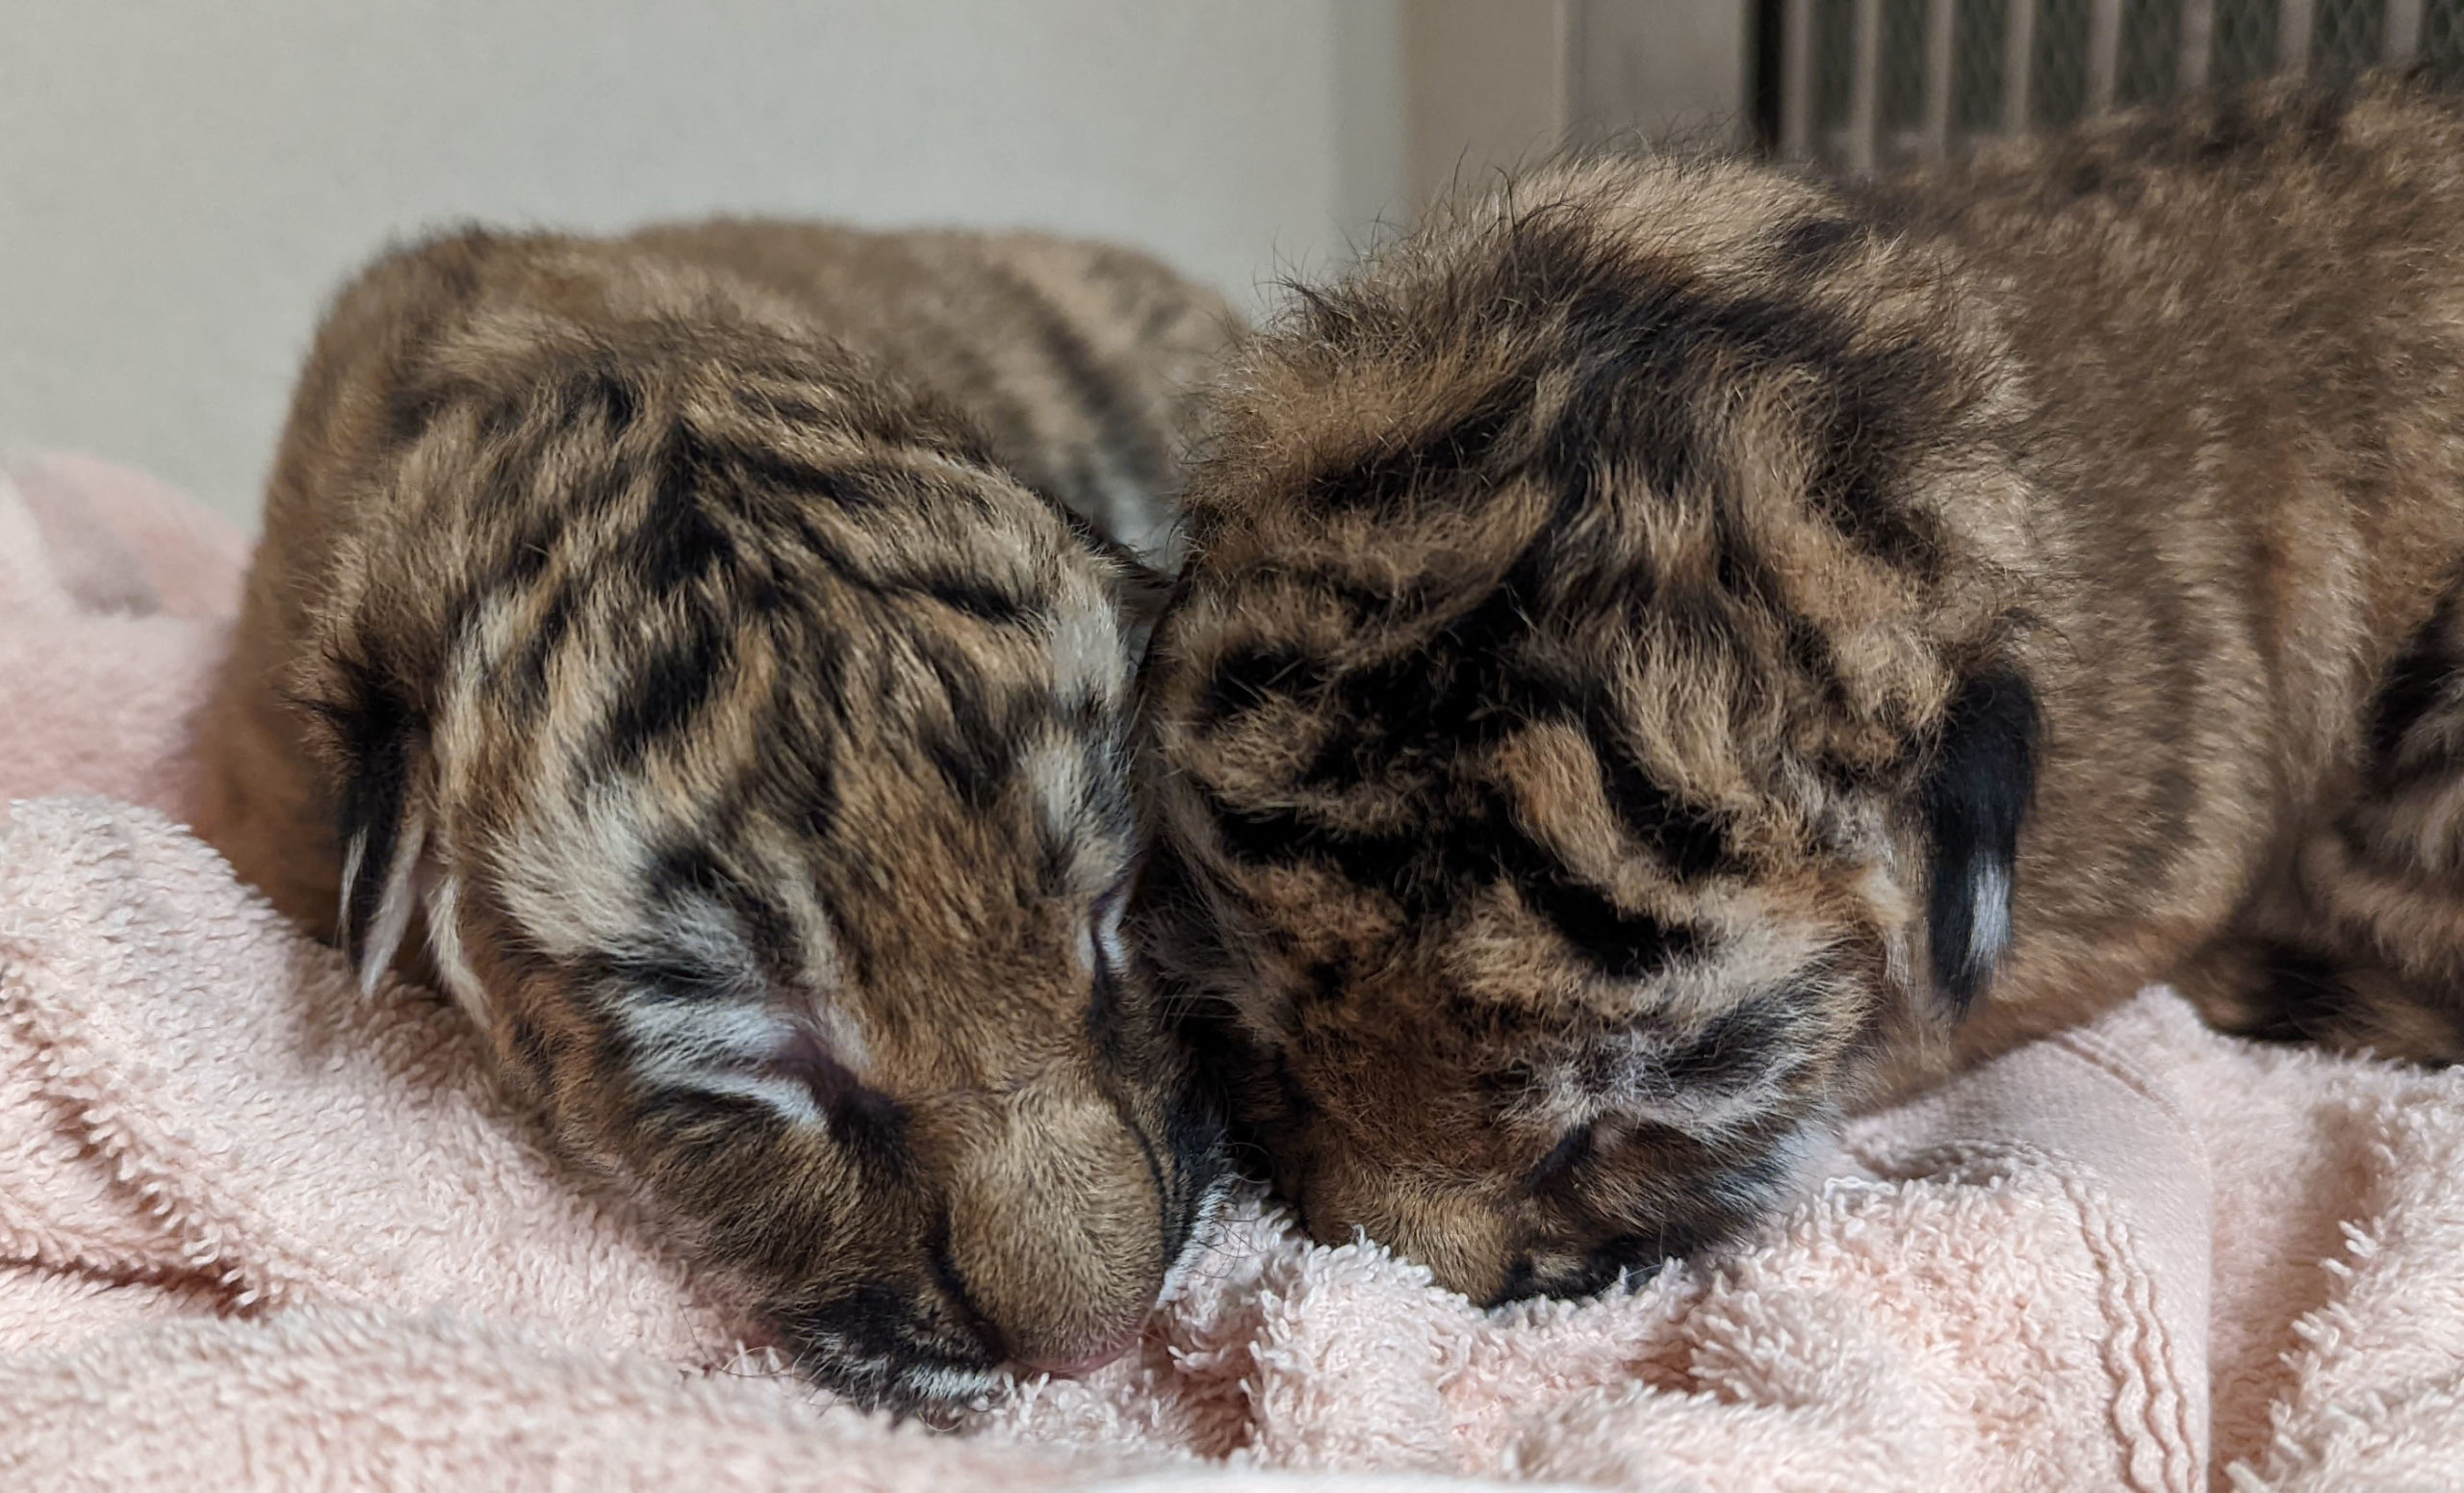 Oh, baby! Indianapolis Zoo welcomes tiger triplets – KIRO 7 News Seattle